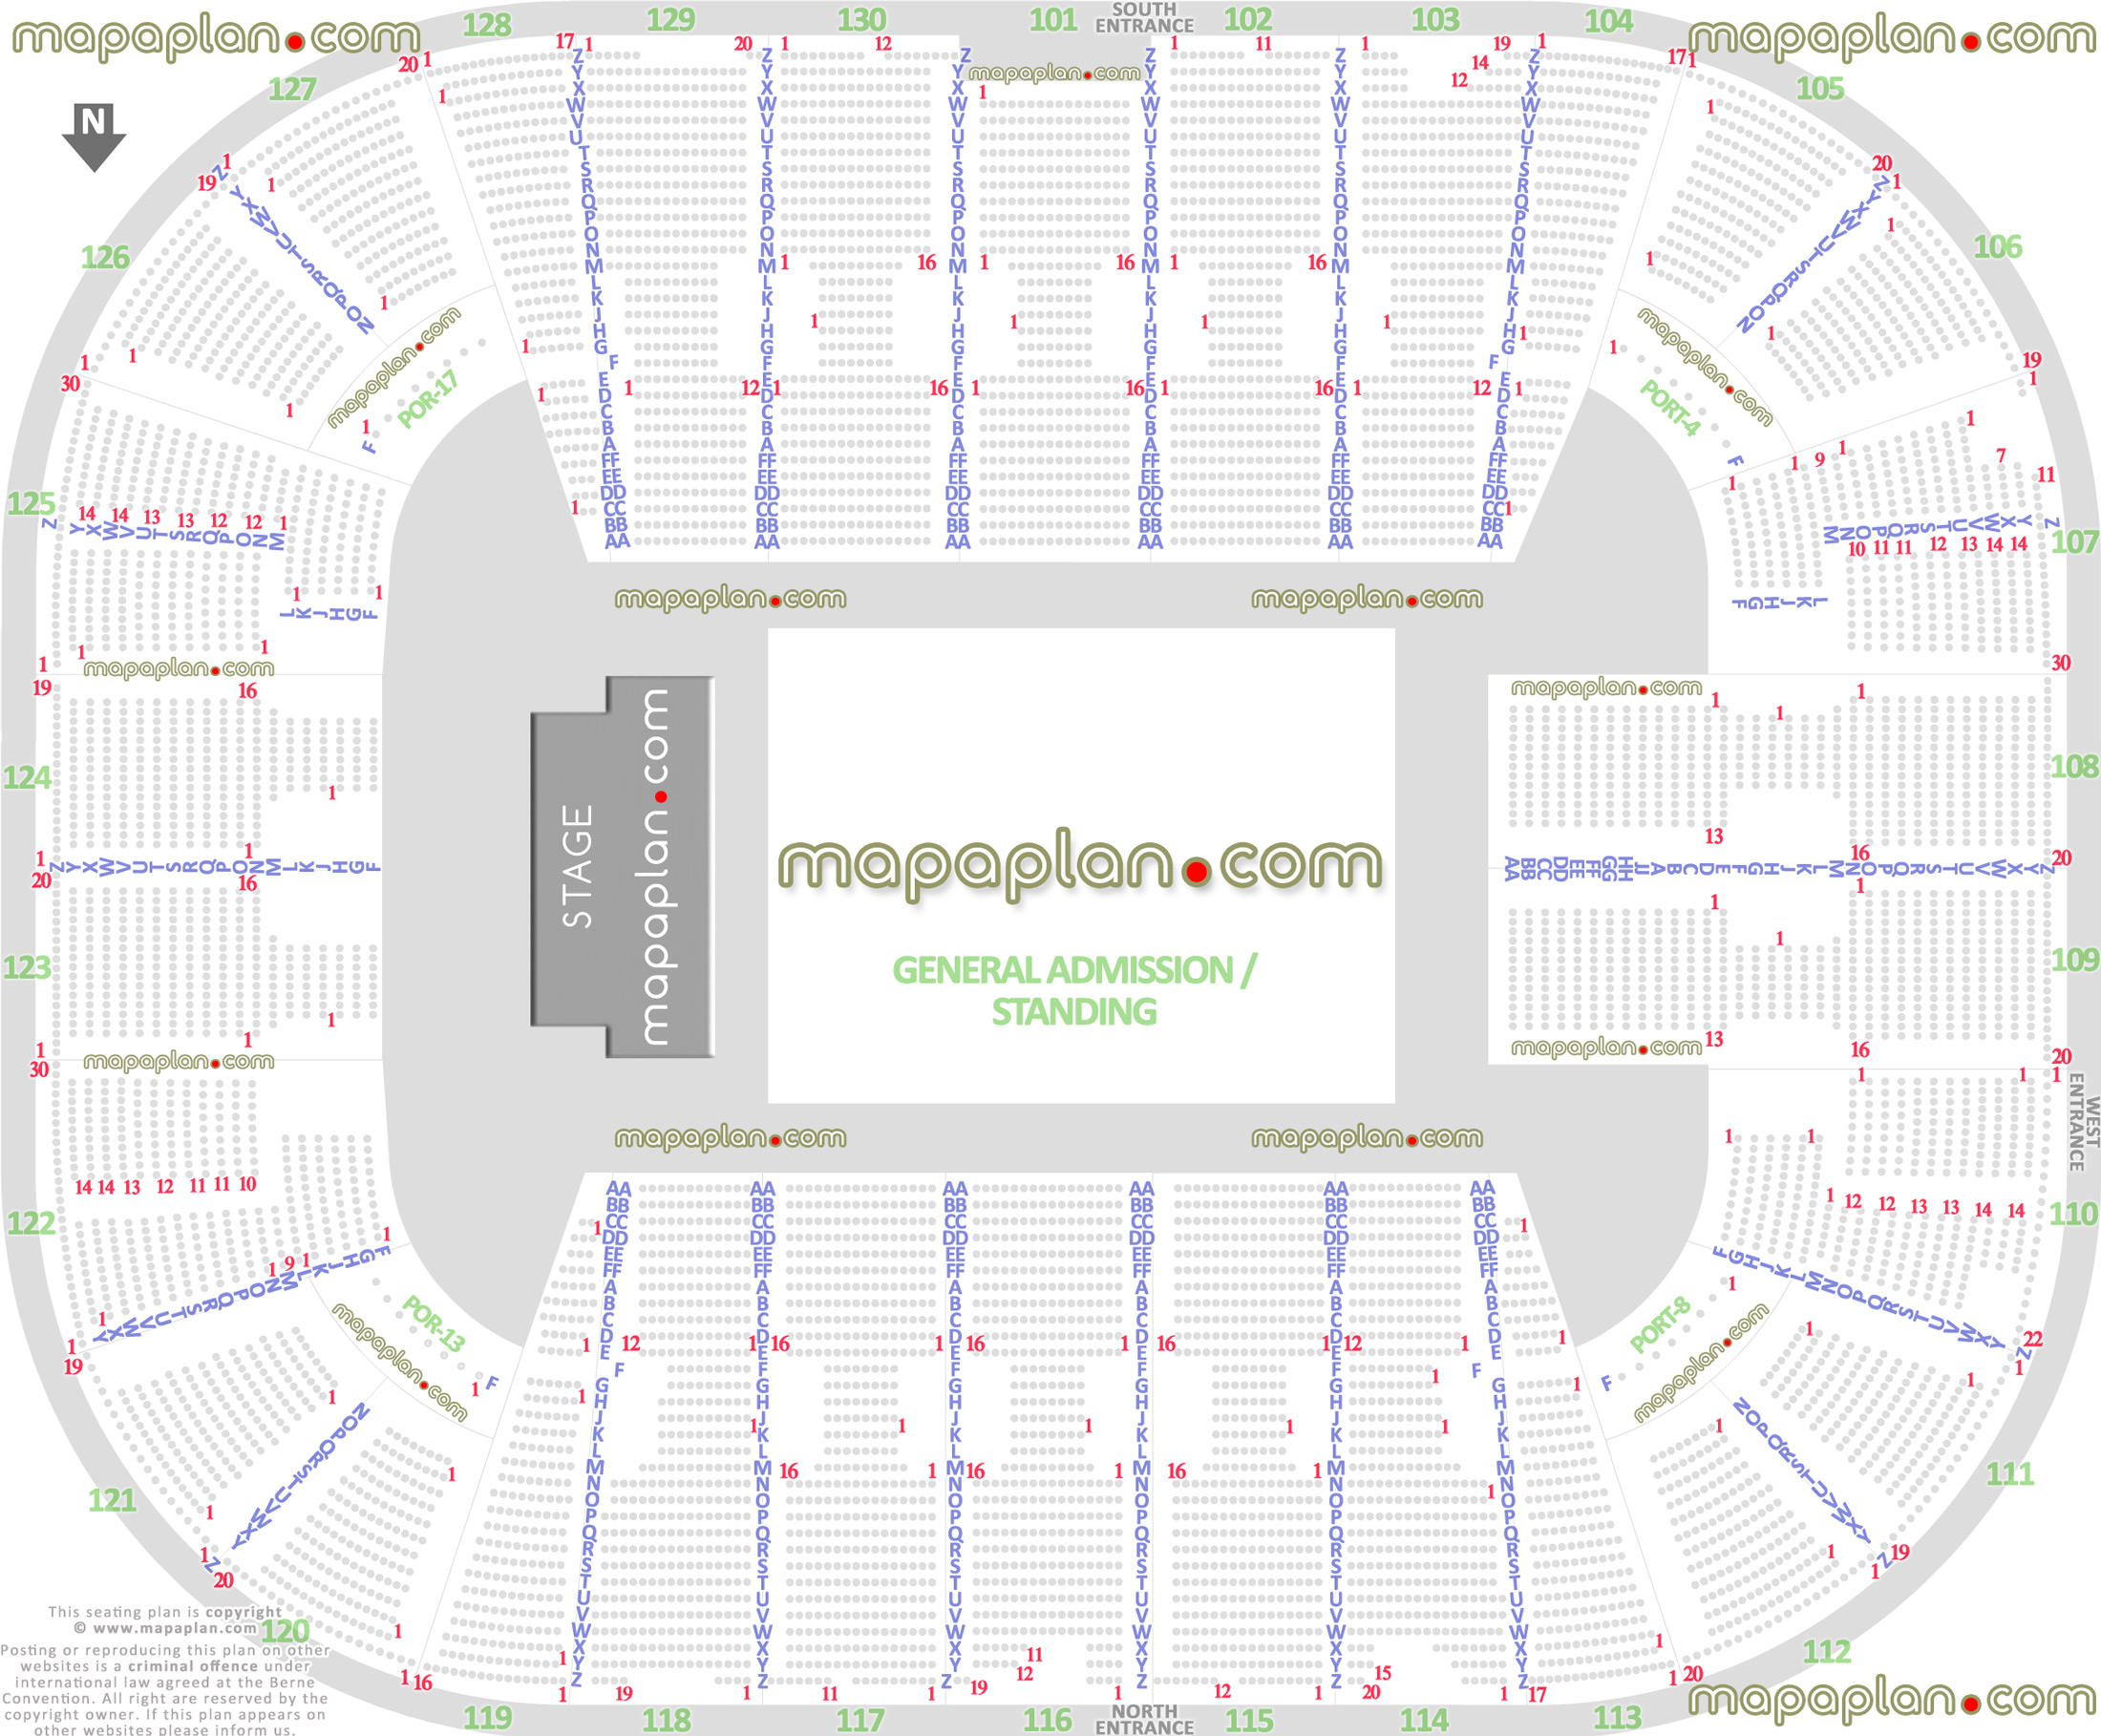 general admission floor standing concert capacity plan fairfax eaglebank arena stage diagram row letters numbers floor pit plan how many seats row aa bb cc dd ee ff gg hh jj a b c d e f g h j k l m n o p q r s t u v w x y z Fairfax EagleBank Arena seating chart